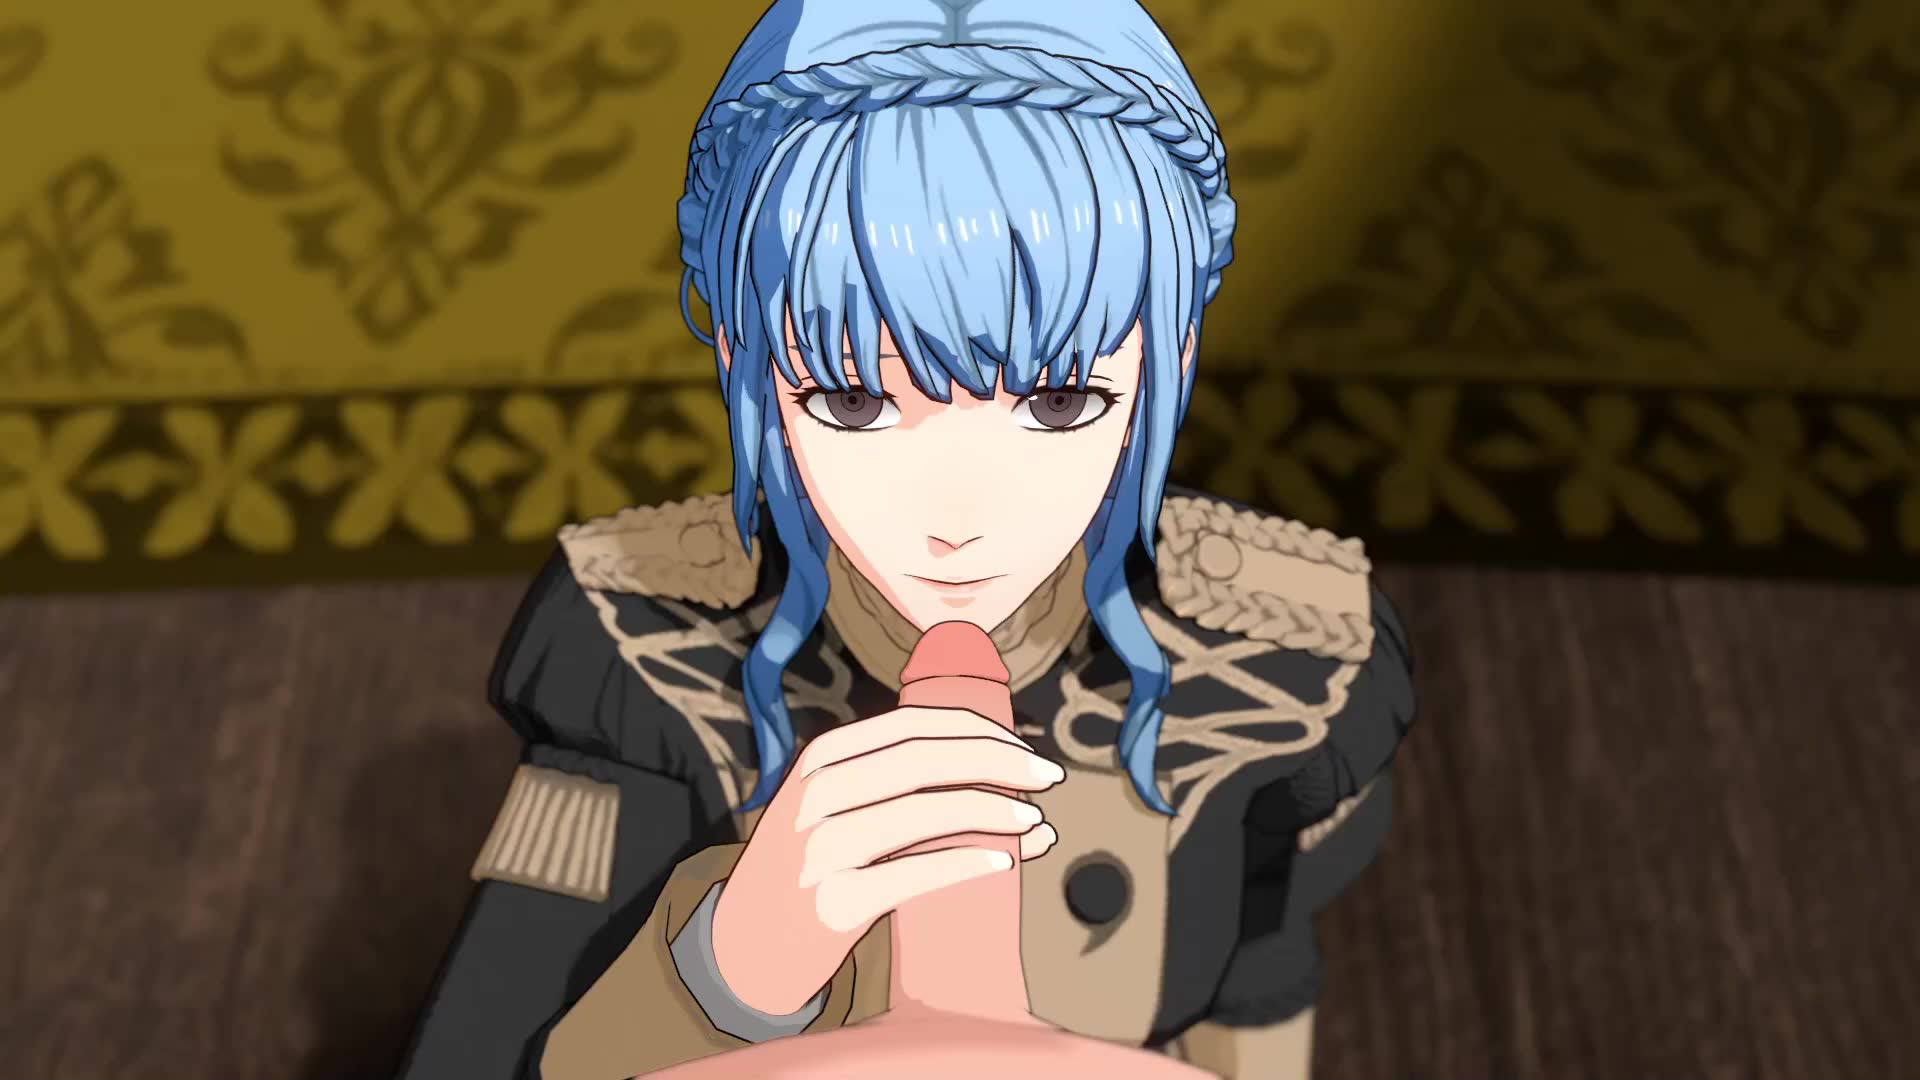 Marianne gets fucked by Byleth in doggy style and missionary position – Fire Emblem NSFW animation thumbnail